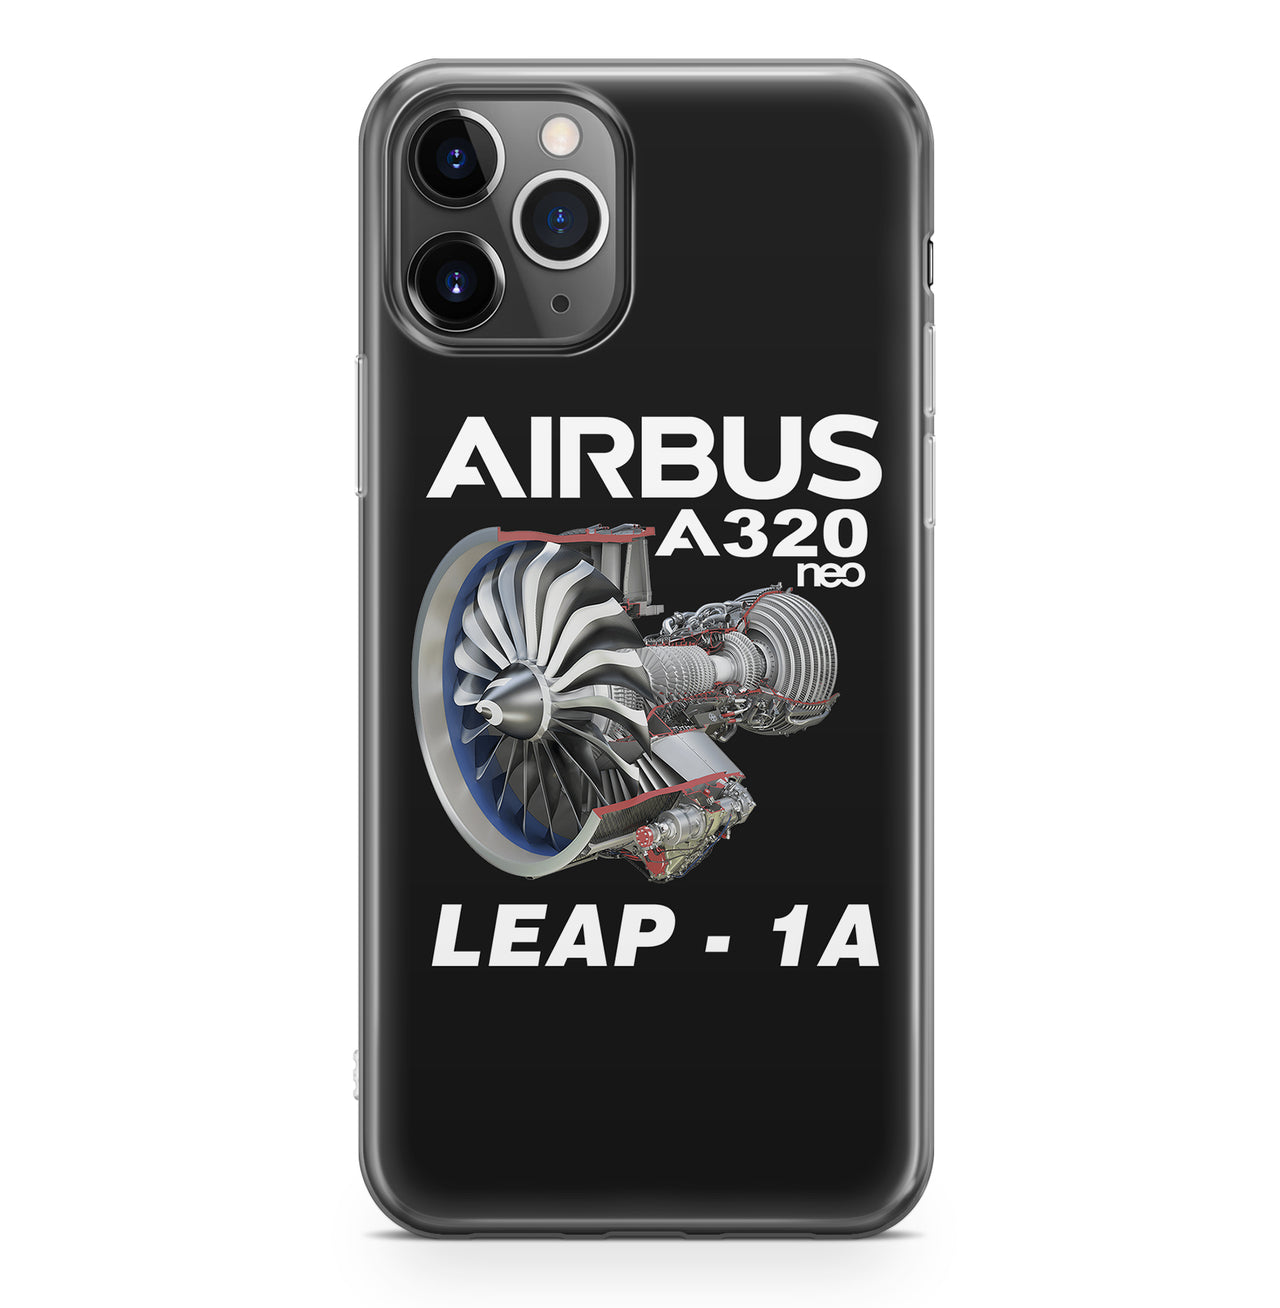 Airbus A320neo & Leap 1A Designed iPhone Cases